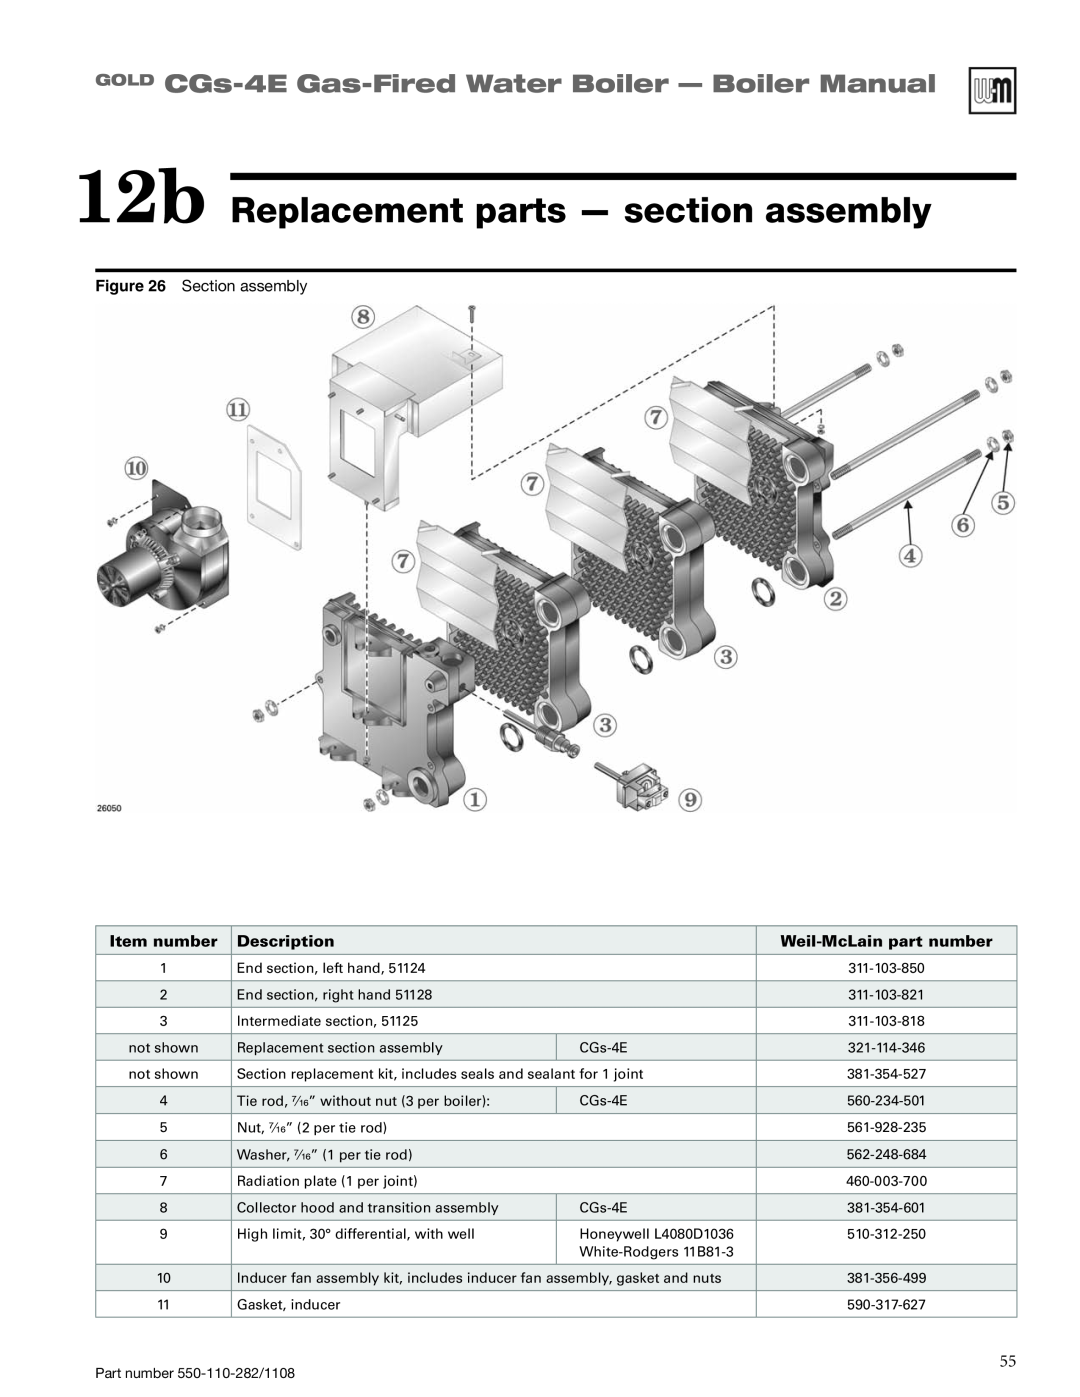 Weil-McLain CGS-4E manual 12b Replacement parts - section assembly, GOLD CGs-4E Gas-FiredWater Boiler - Boiler Manual 